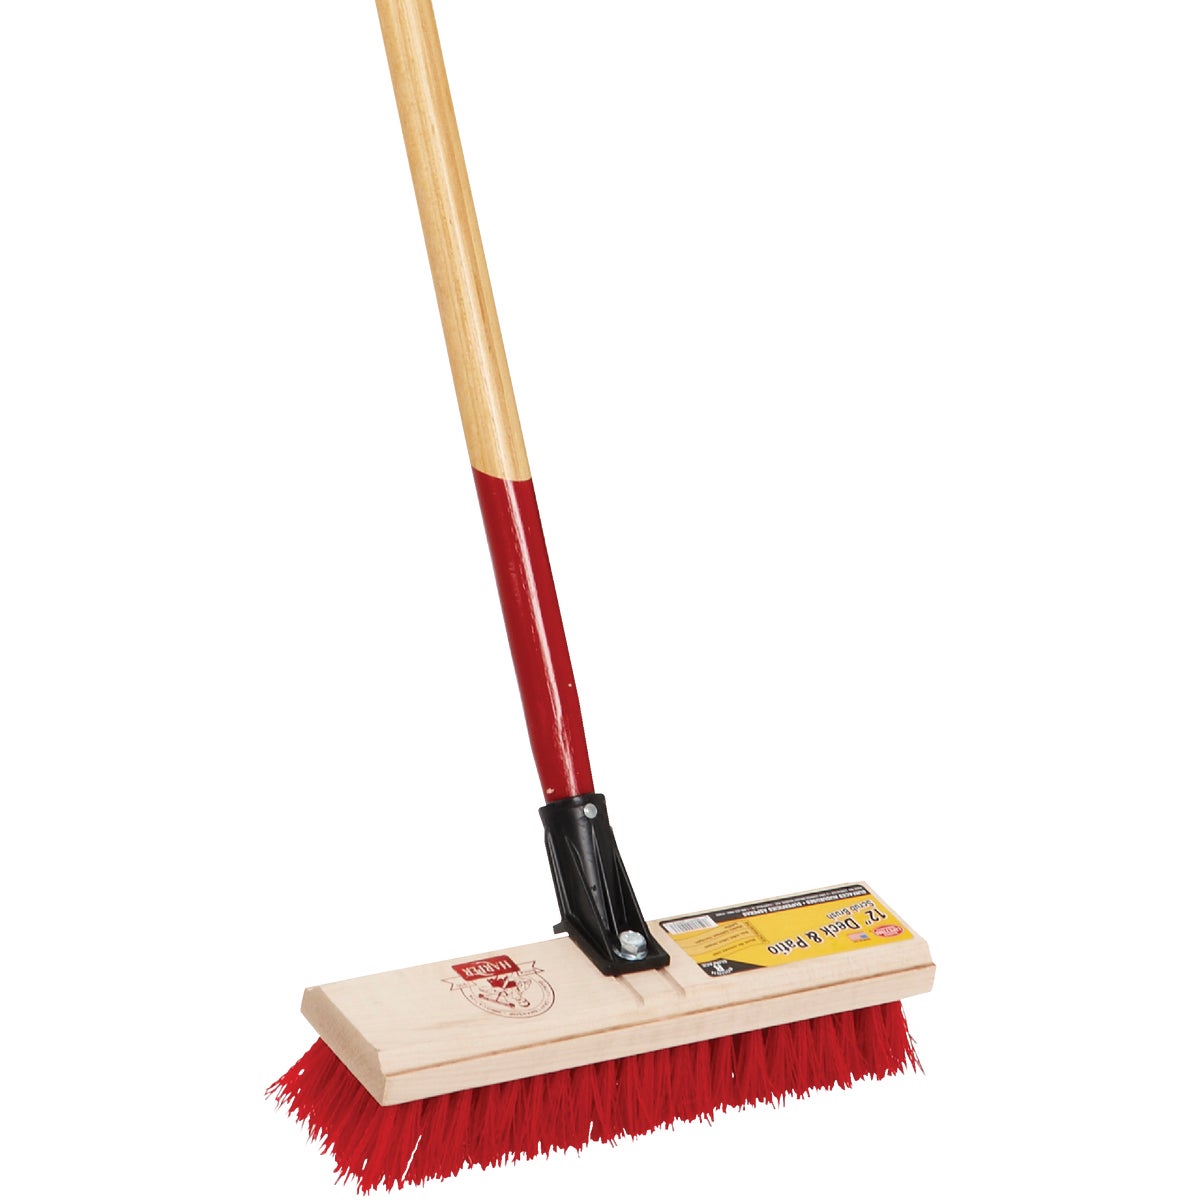 Item 612313, 12 In. deck brush, 1-1/8 In. x 60 In. wood bolt on handle.